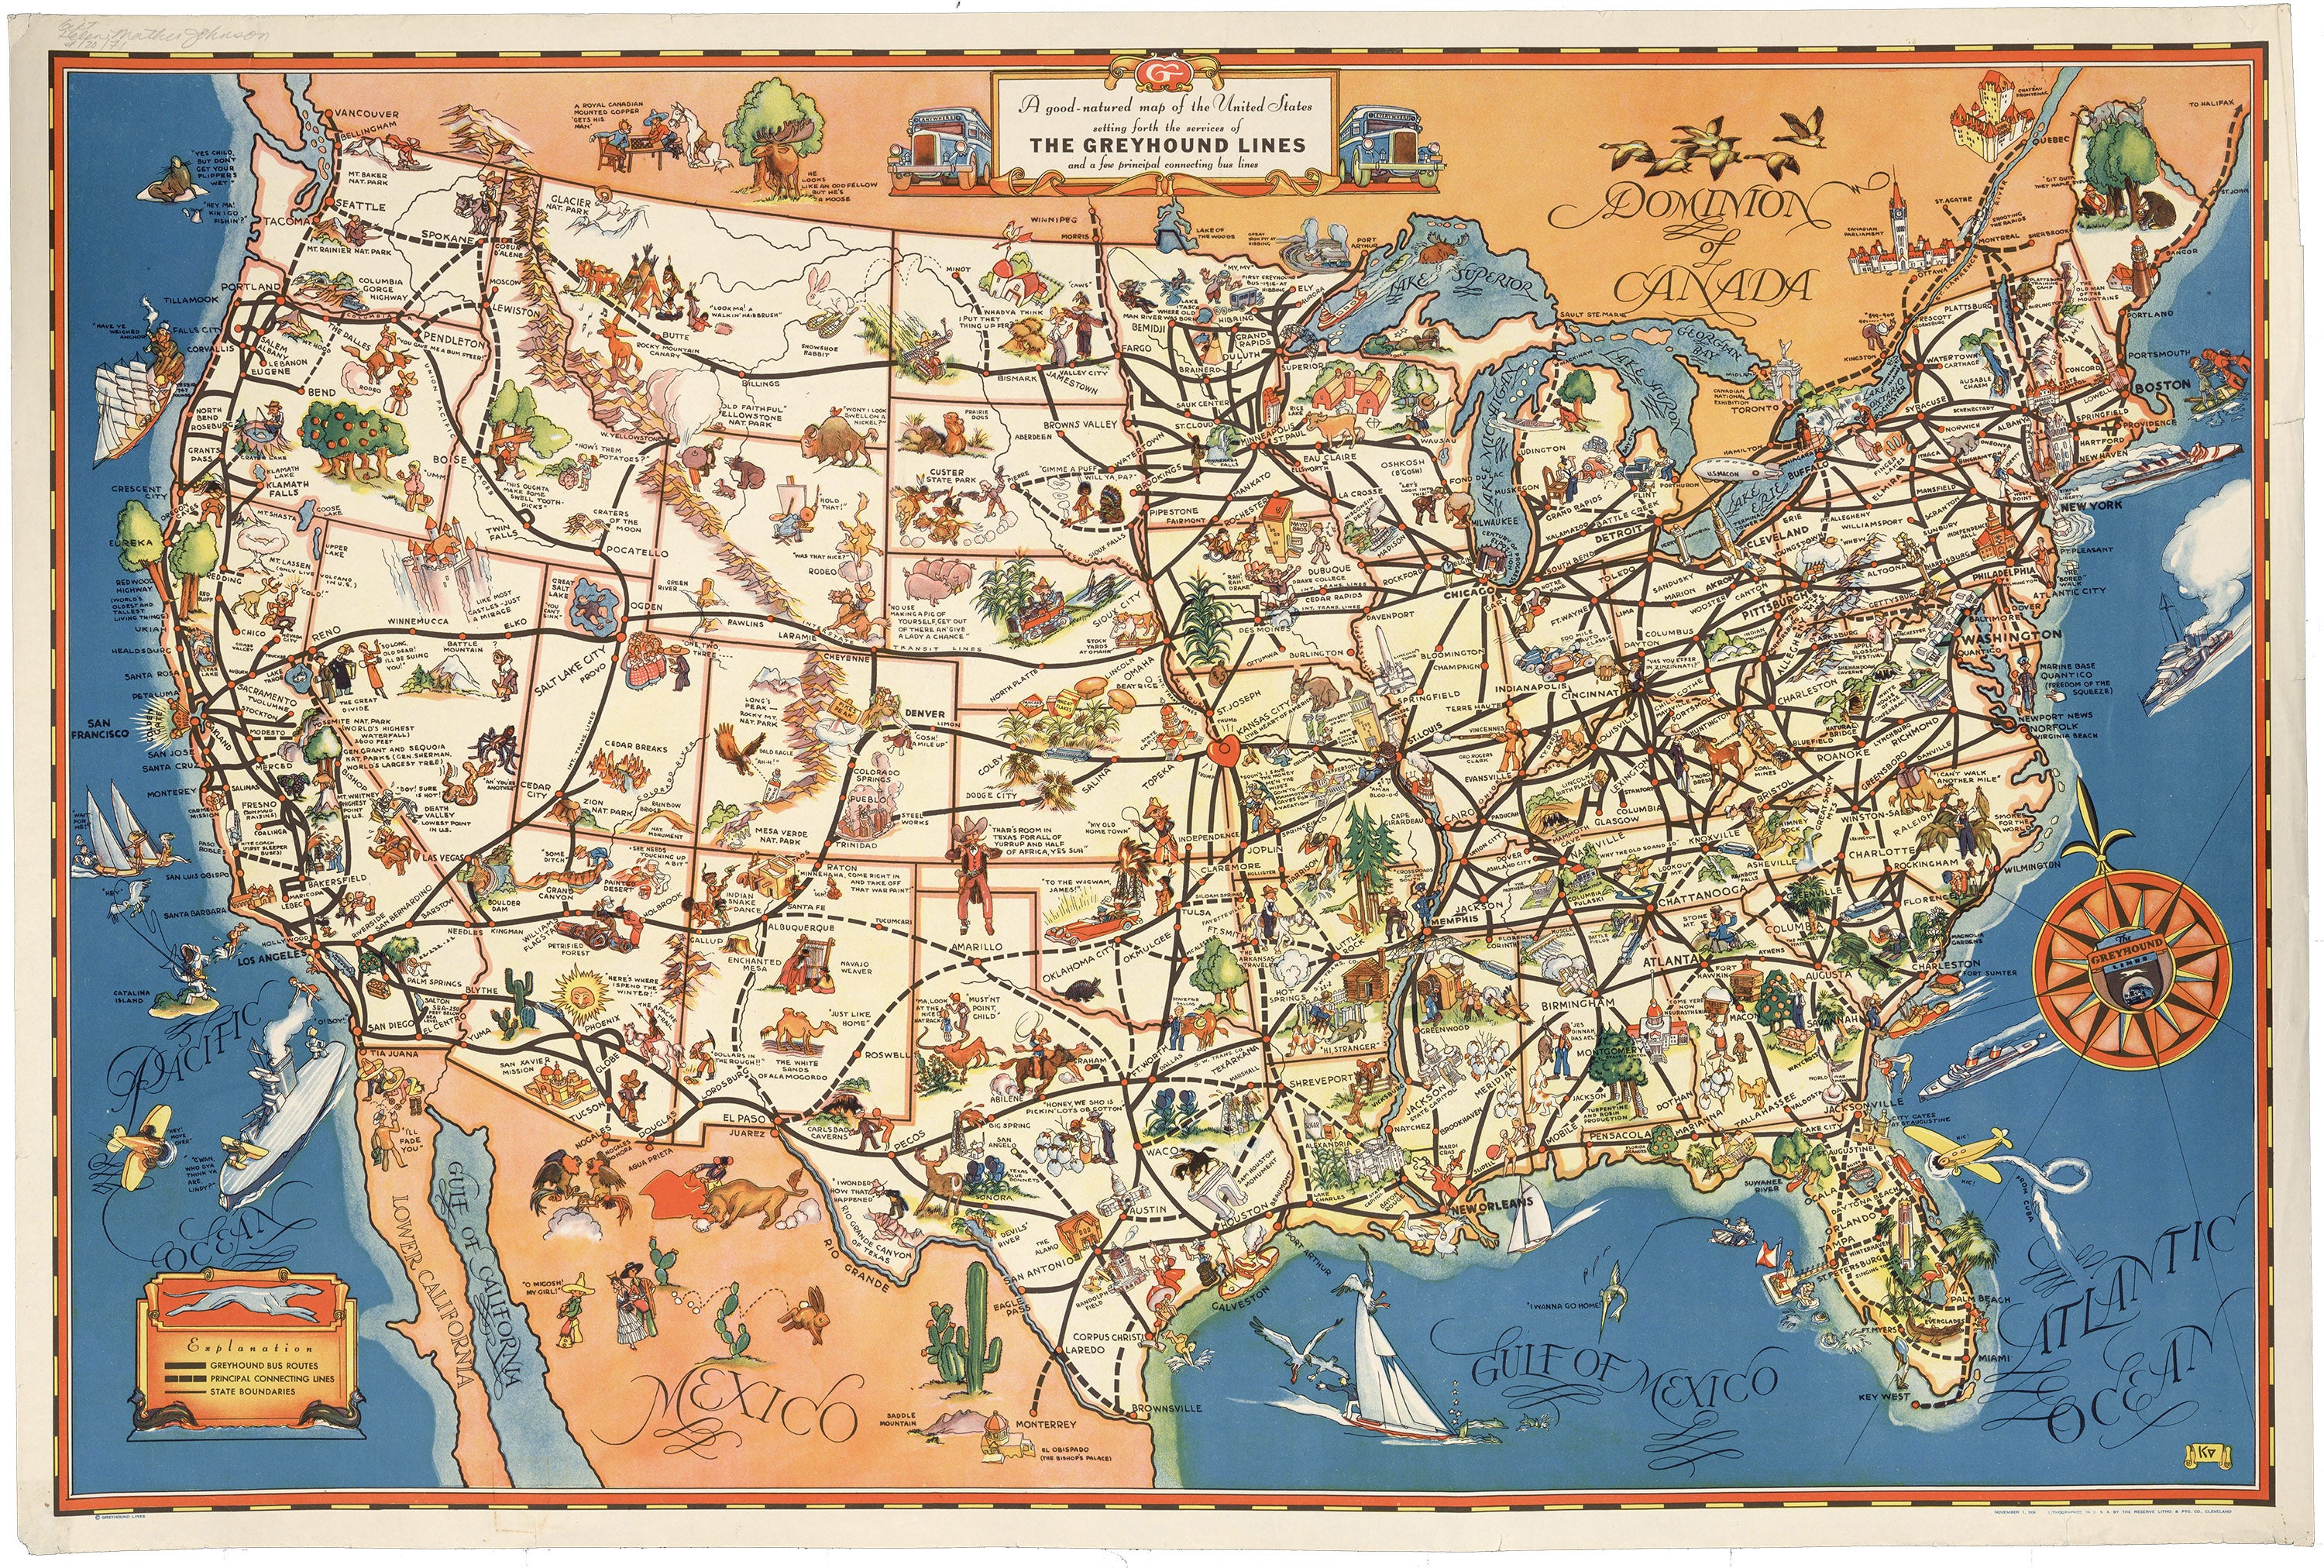 Pictorial map of the United States delineates Greyhound Bus Lines in 1934